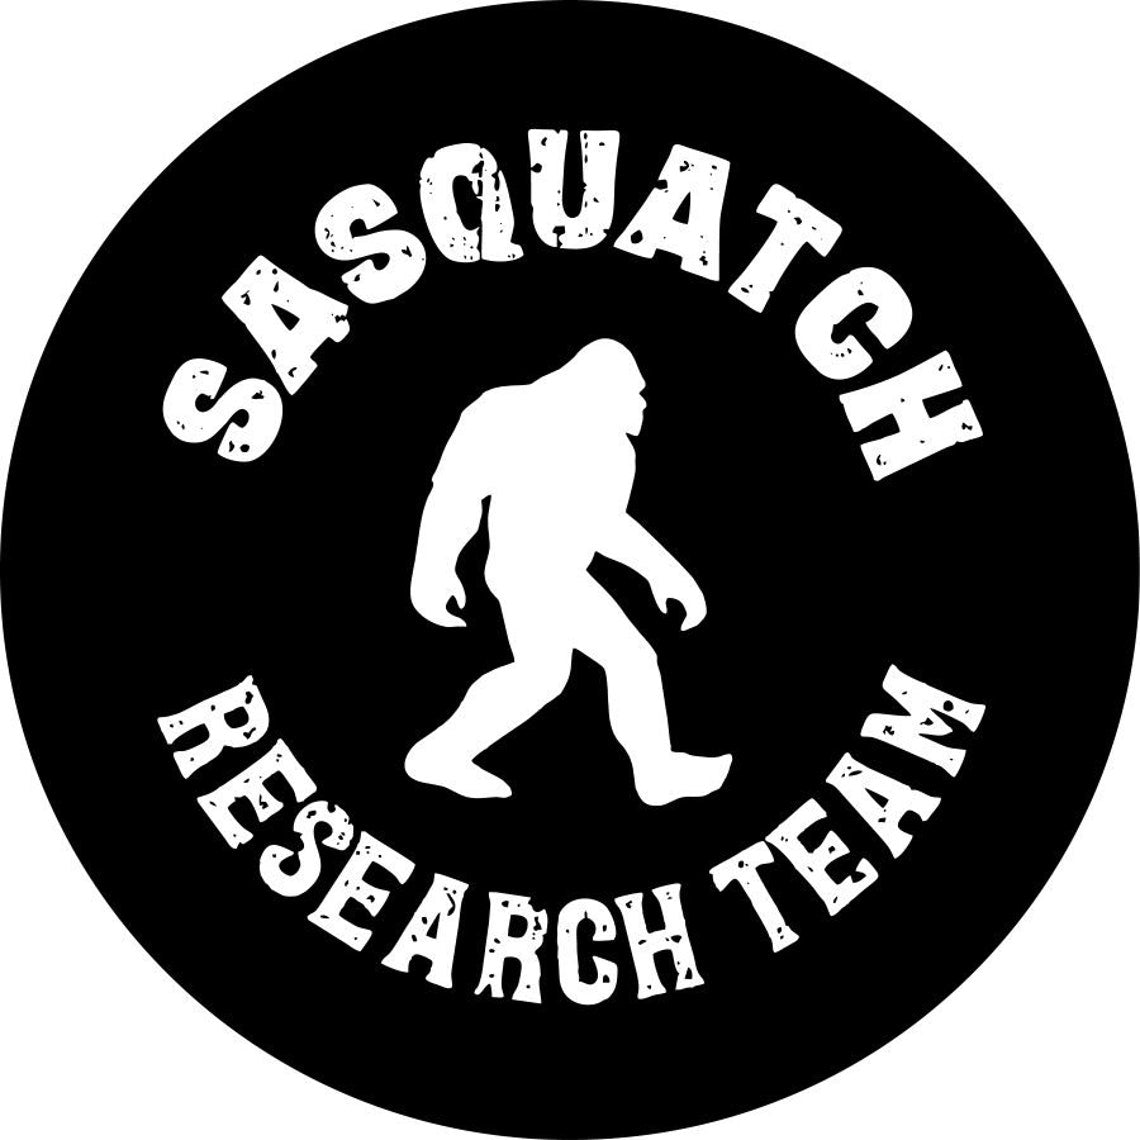 Bigfoot or Sasquatch Research Team (ANY COLOR)